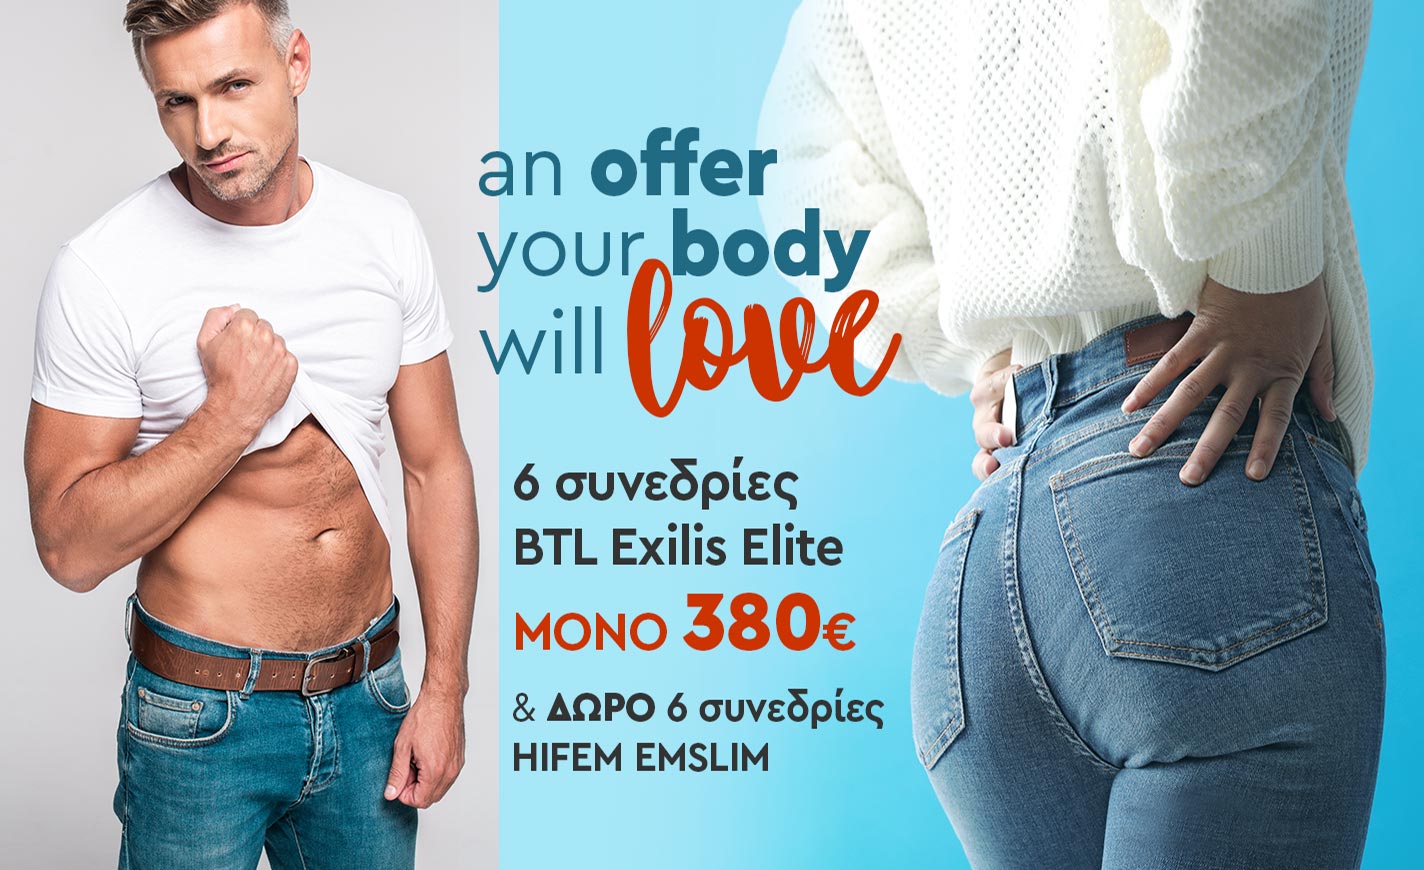 An Offer your body will love